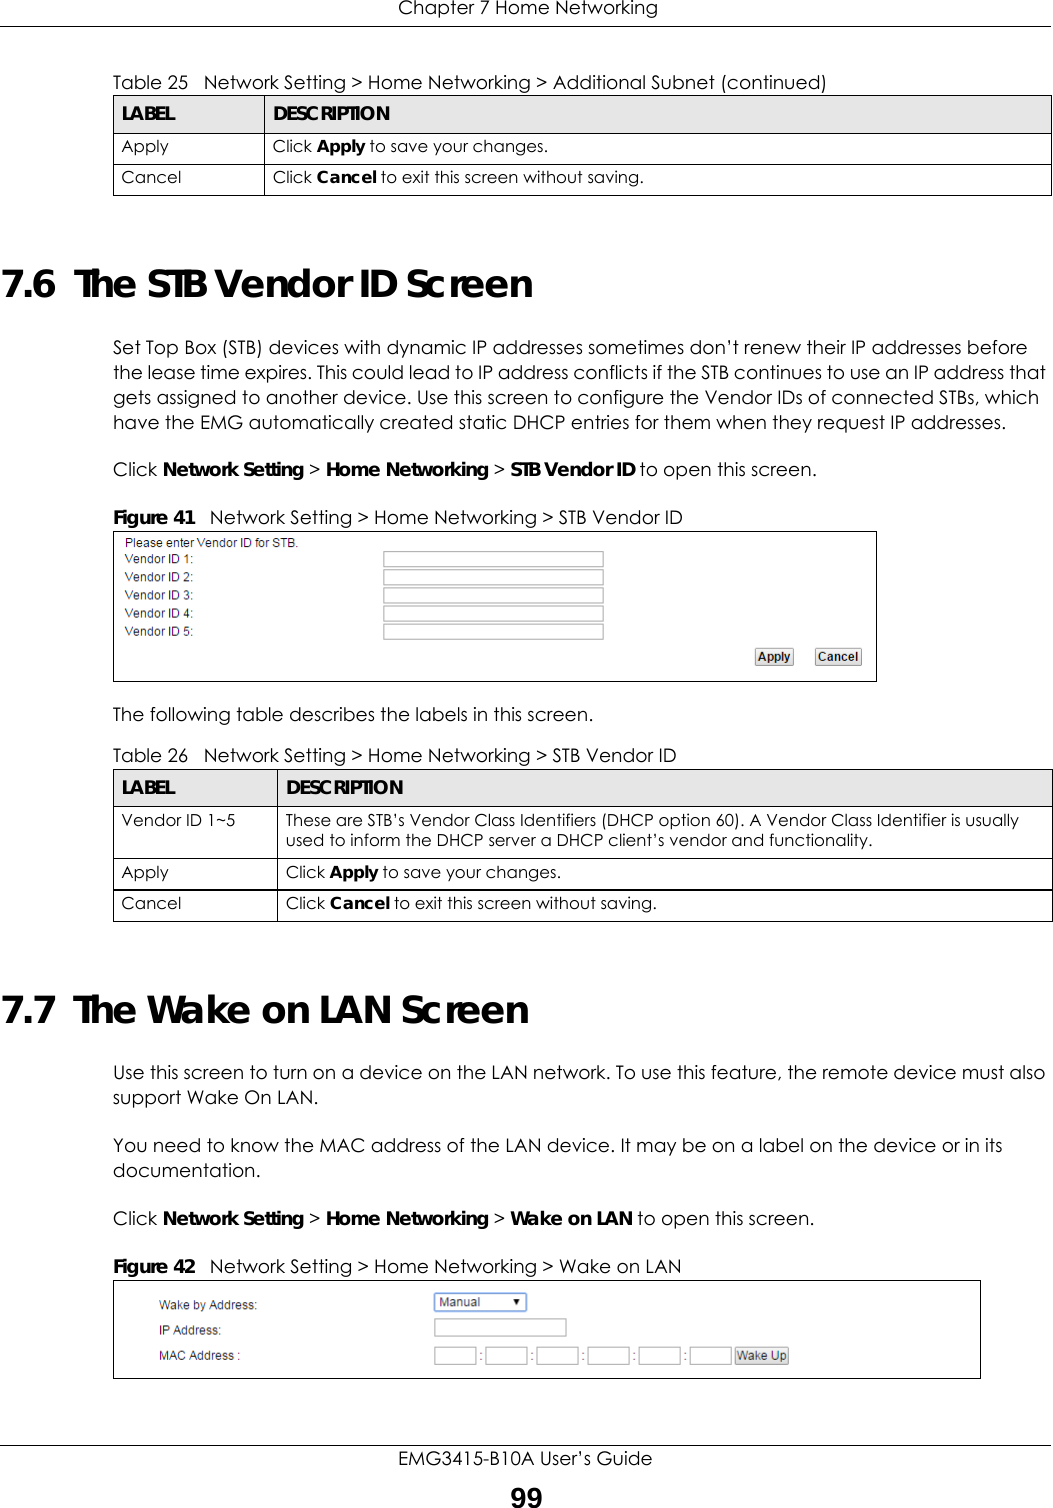  Chapter 7 Home NetworkingEMG3415-B10A User’s Guide997.6  The STB Vendor ID ScreenSet Top Box (STB) devices with dynamic IP addresses sometimes don’t renew their IP addresses before the lease time expires. This could lead to IP address conflicts if the STB continues to use an IP address that gets assigned to another device. Use this screen to configure the Vendor IDs of connected STBs, which have the EMG automatically created static DHCP entries for them when they request IP addresses.Click Network Setting &gt; Home Networking &gt; STB Vendor ID to open this screen. Figure 41   Network Setting &gt; Home Networking &gt; STB Vendor IDThe following table describes the labels in this screen.7.7  The Wake on LAN ScreenUse this screen to turn on a device on the LAN network. To use this feature, the remote device must also support Wake On LAN.You need to know the MAC address of the LAN device. It may be on a label on the device or in its documentation.Click Network Setting &gt; Home Networking &gt; Wake on LAN to open this screen.  Figure 42   Network Setting &gt; Home Networking &gt; Wake on LANApply Click Apply to save your changes.Cancel Click Cancel to exit this screen without saving.Table 25   Network Setting &gt; Home Networking &gt; Additional Subnet (continued)LABEL DESCRIPTIONTable 26   Network Setting &gt; Home Networking &gt; STB Vendor IDLABEL DESCRIPTIONVendor ID 1~5 These are STB’s Vendor Class Identifiers (DHCP option 60). A Vendor Class Identifier is usually used to inform the DHCP server a DHCP client’s vendor and functionality.Apply Click Apply to save your changes.Cancel Click Cancel to exit this screen without saving.